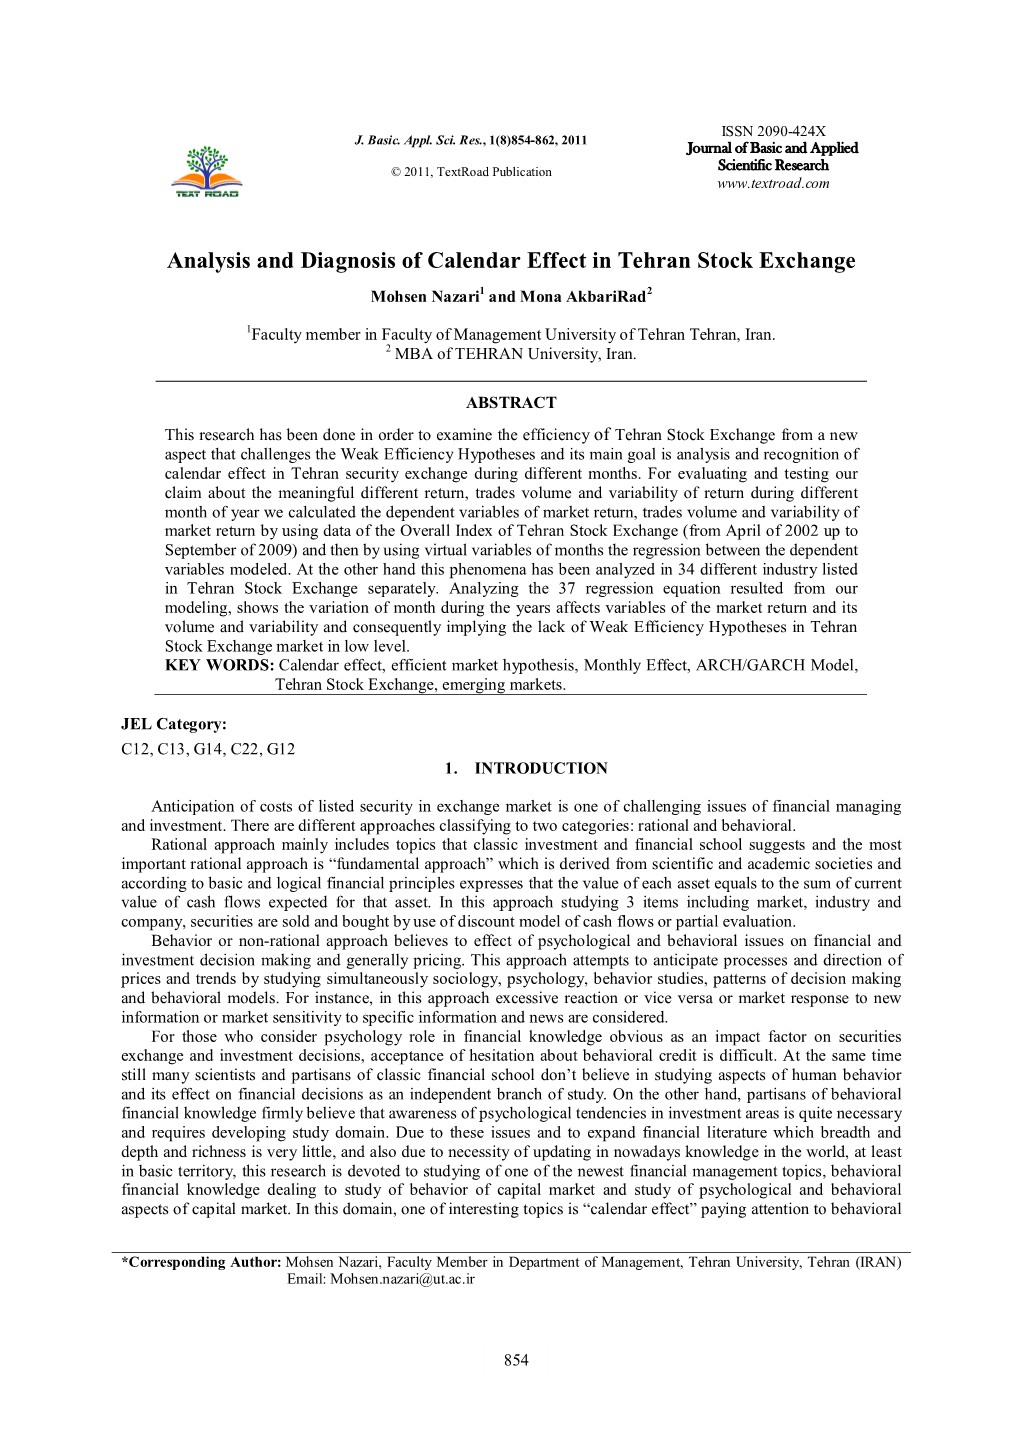 Analysis and Diagnosis of Calendar Effect in Tehran Stock Exchange